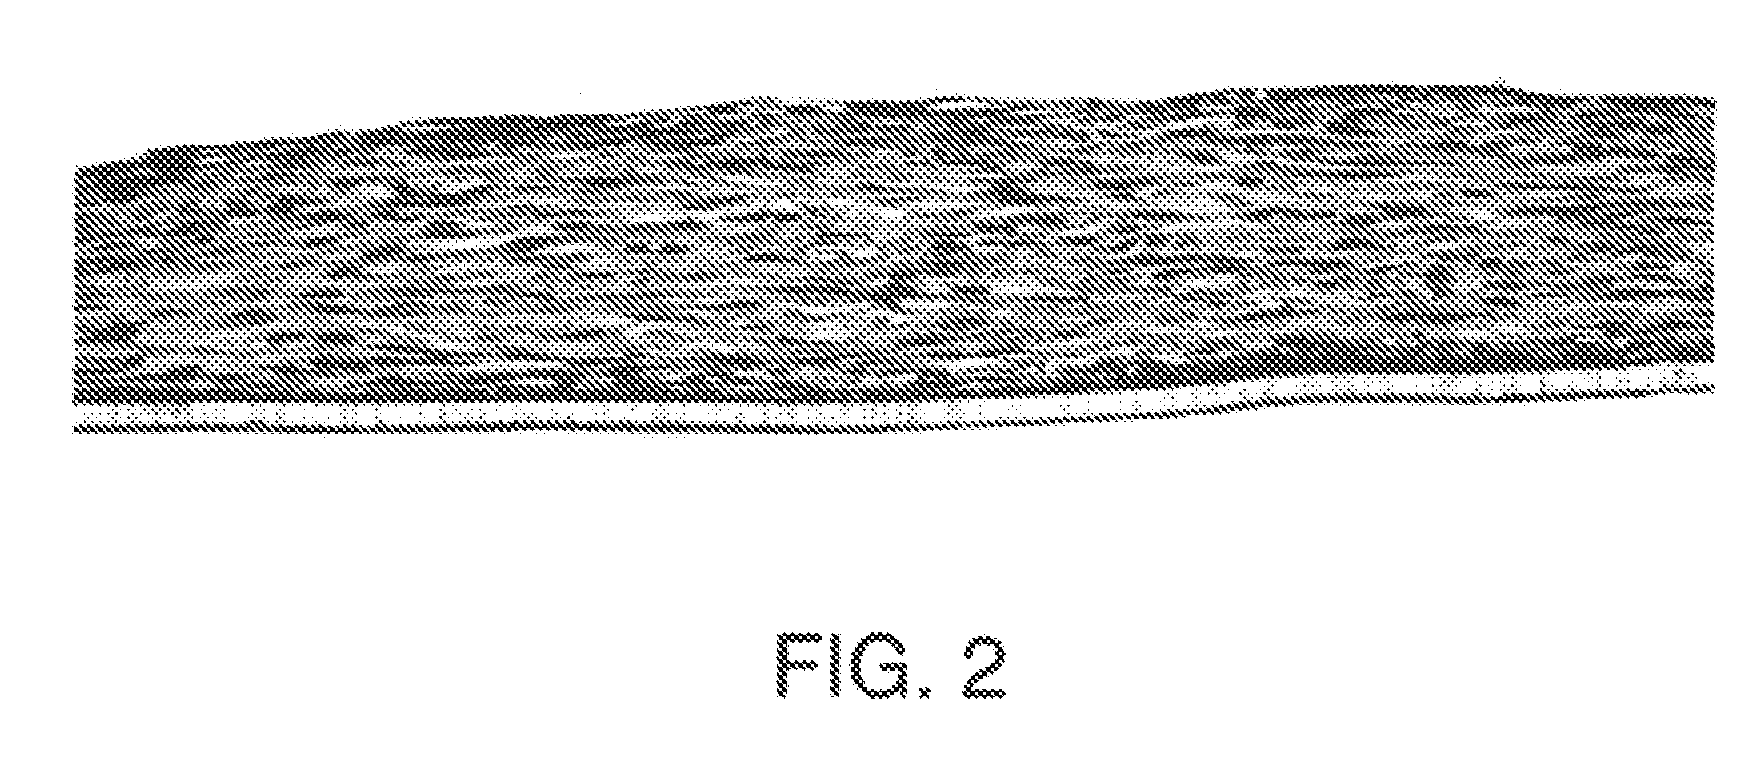 Bioengineered tissue constructs and cardiac uses thereof